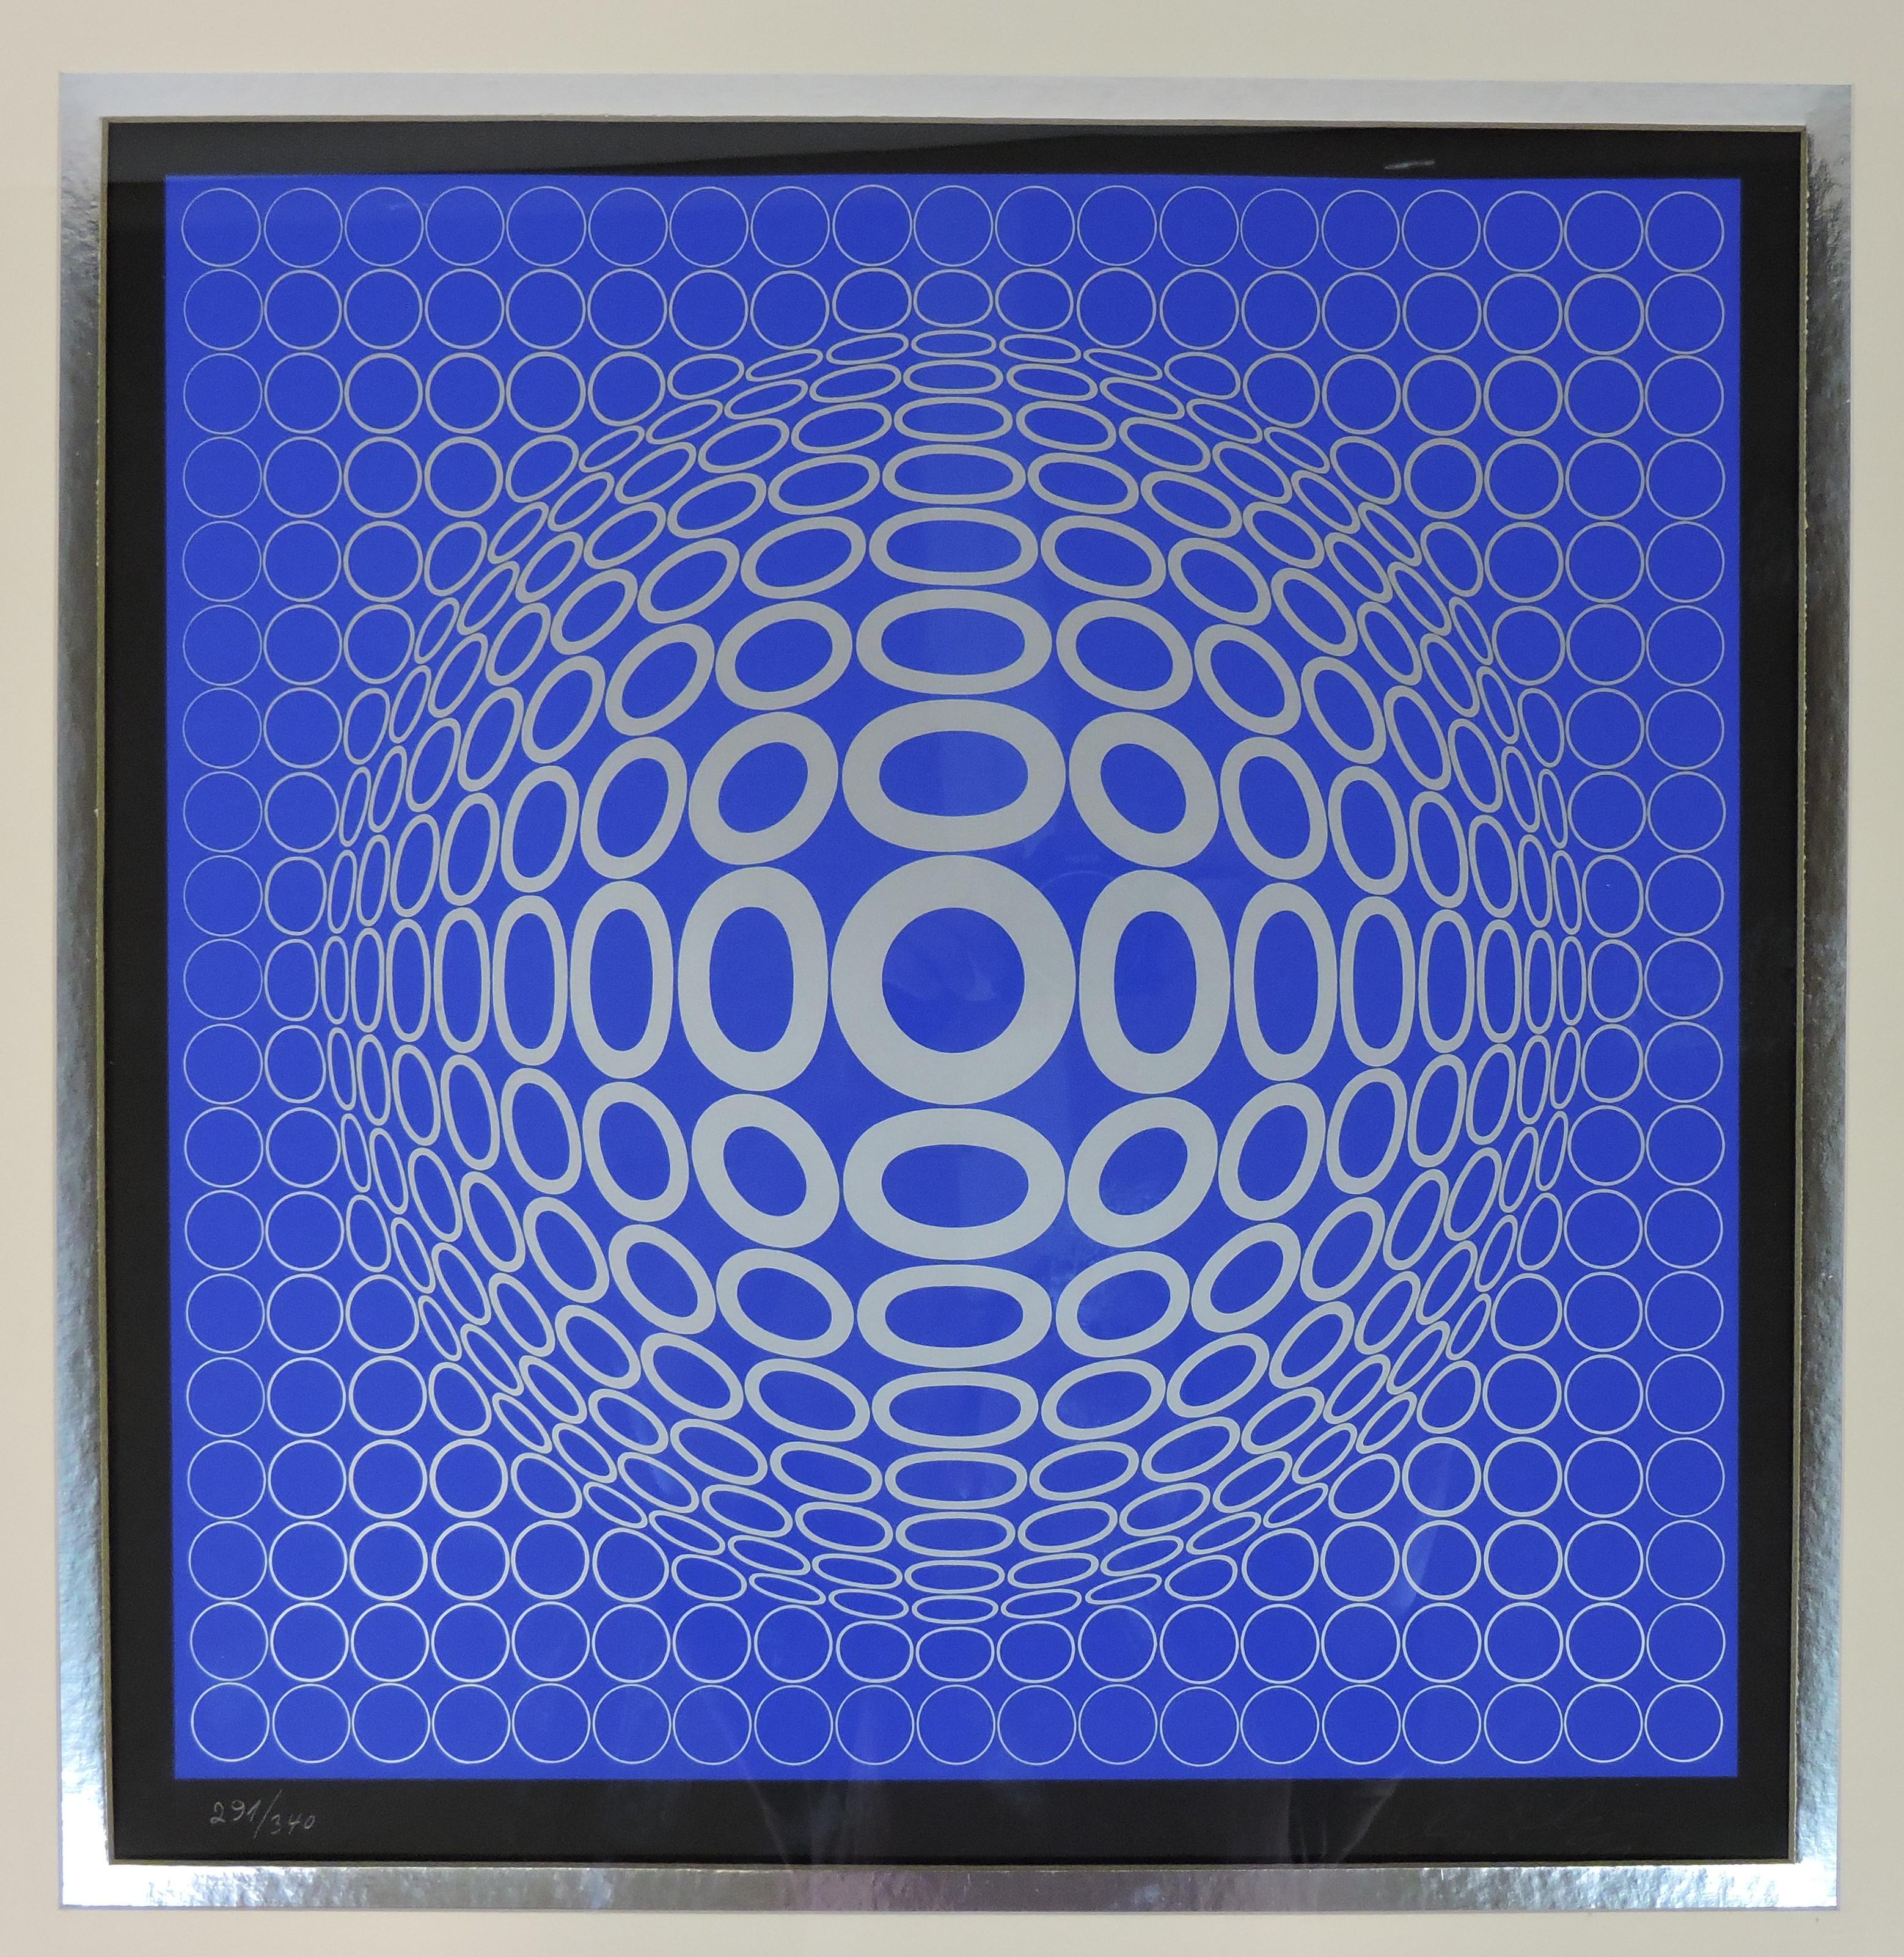 Very cool original Op Art blue and silver screenprint, TUZ, by Victor Vasarely from 1974. Signed in the lower right hand corner, numbered 291/340 in the lower left. This has the original silver metal frame and matting and was printed in Germany as